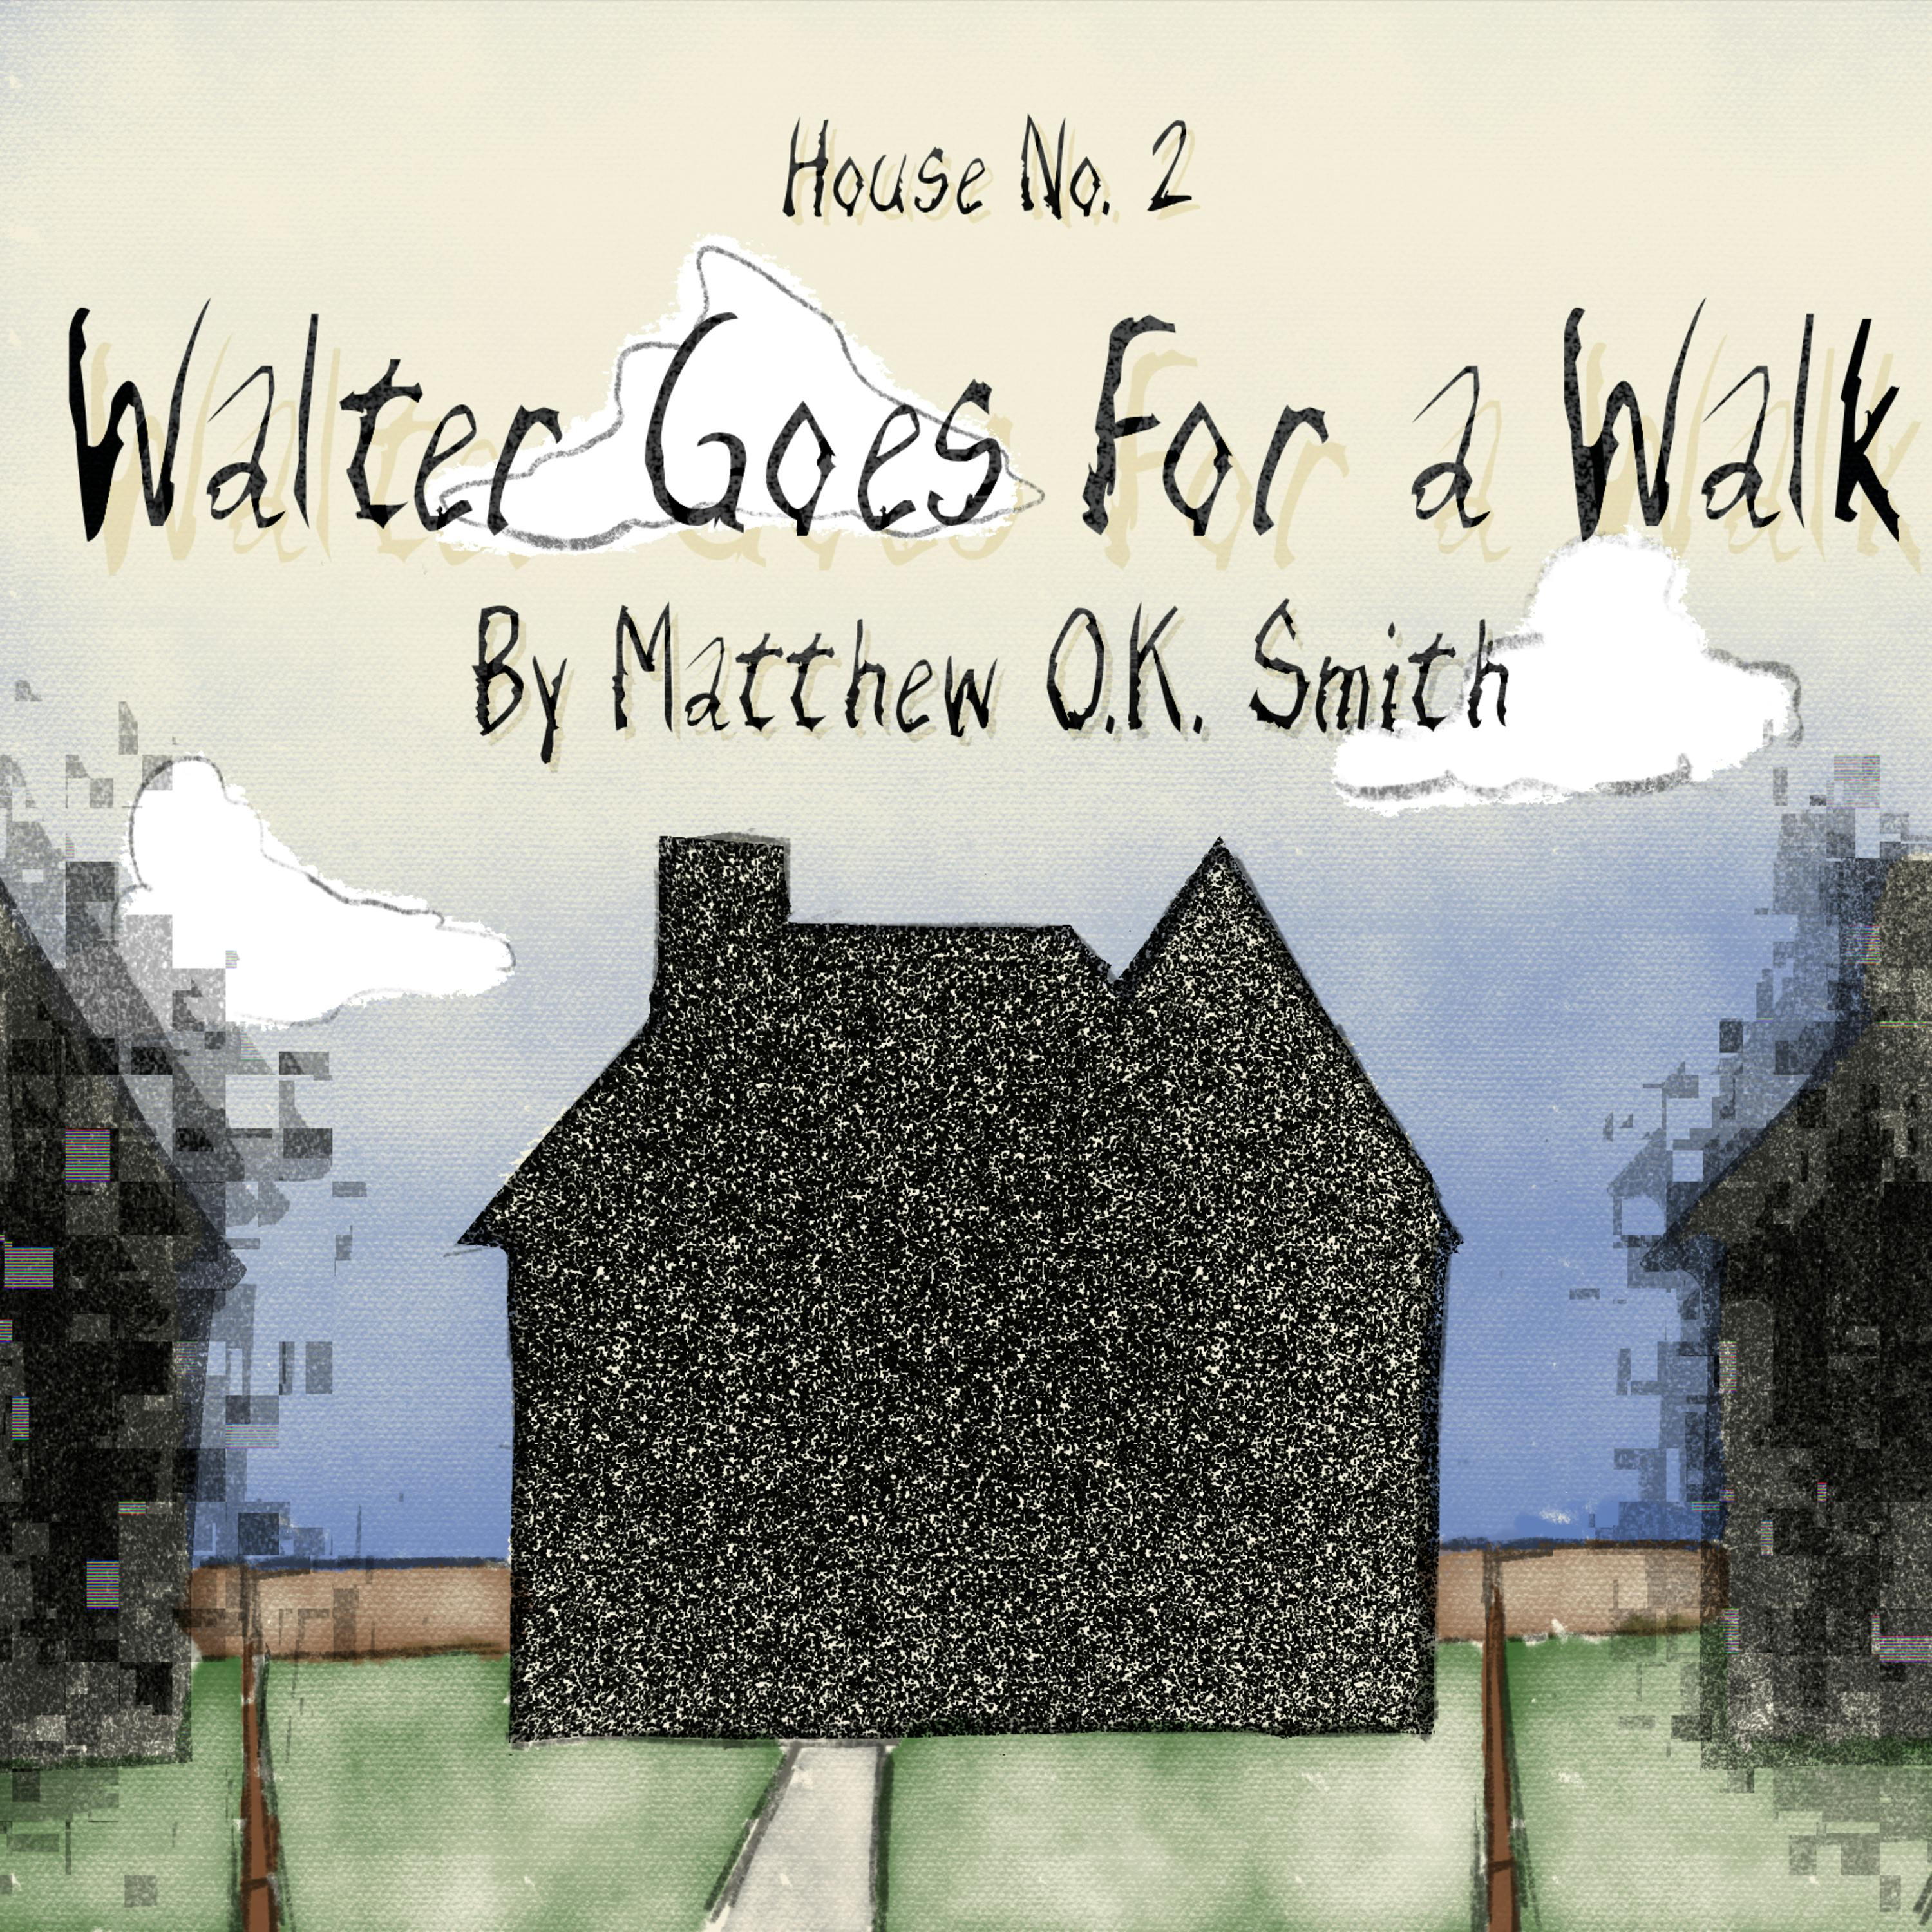 House No. 2: Walter Goes For a Walk